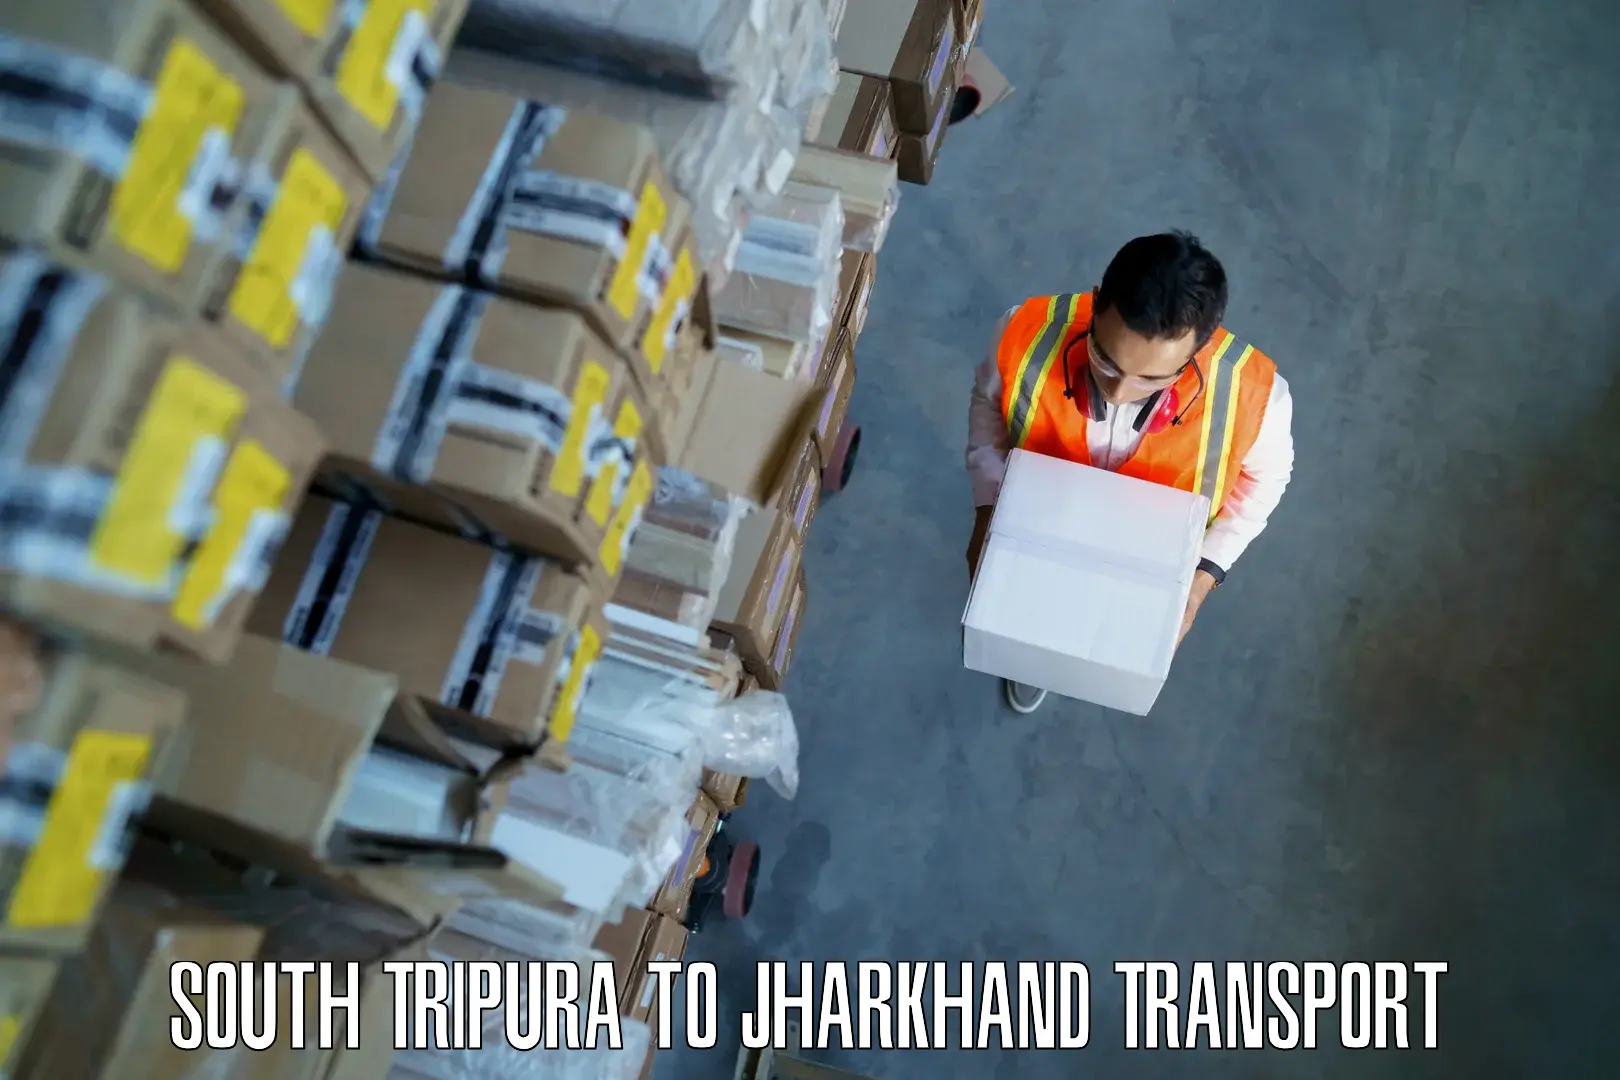 Transport shared services in South Tripura to Chandwa